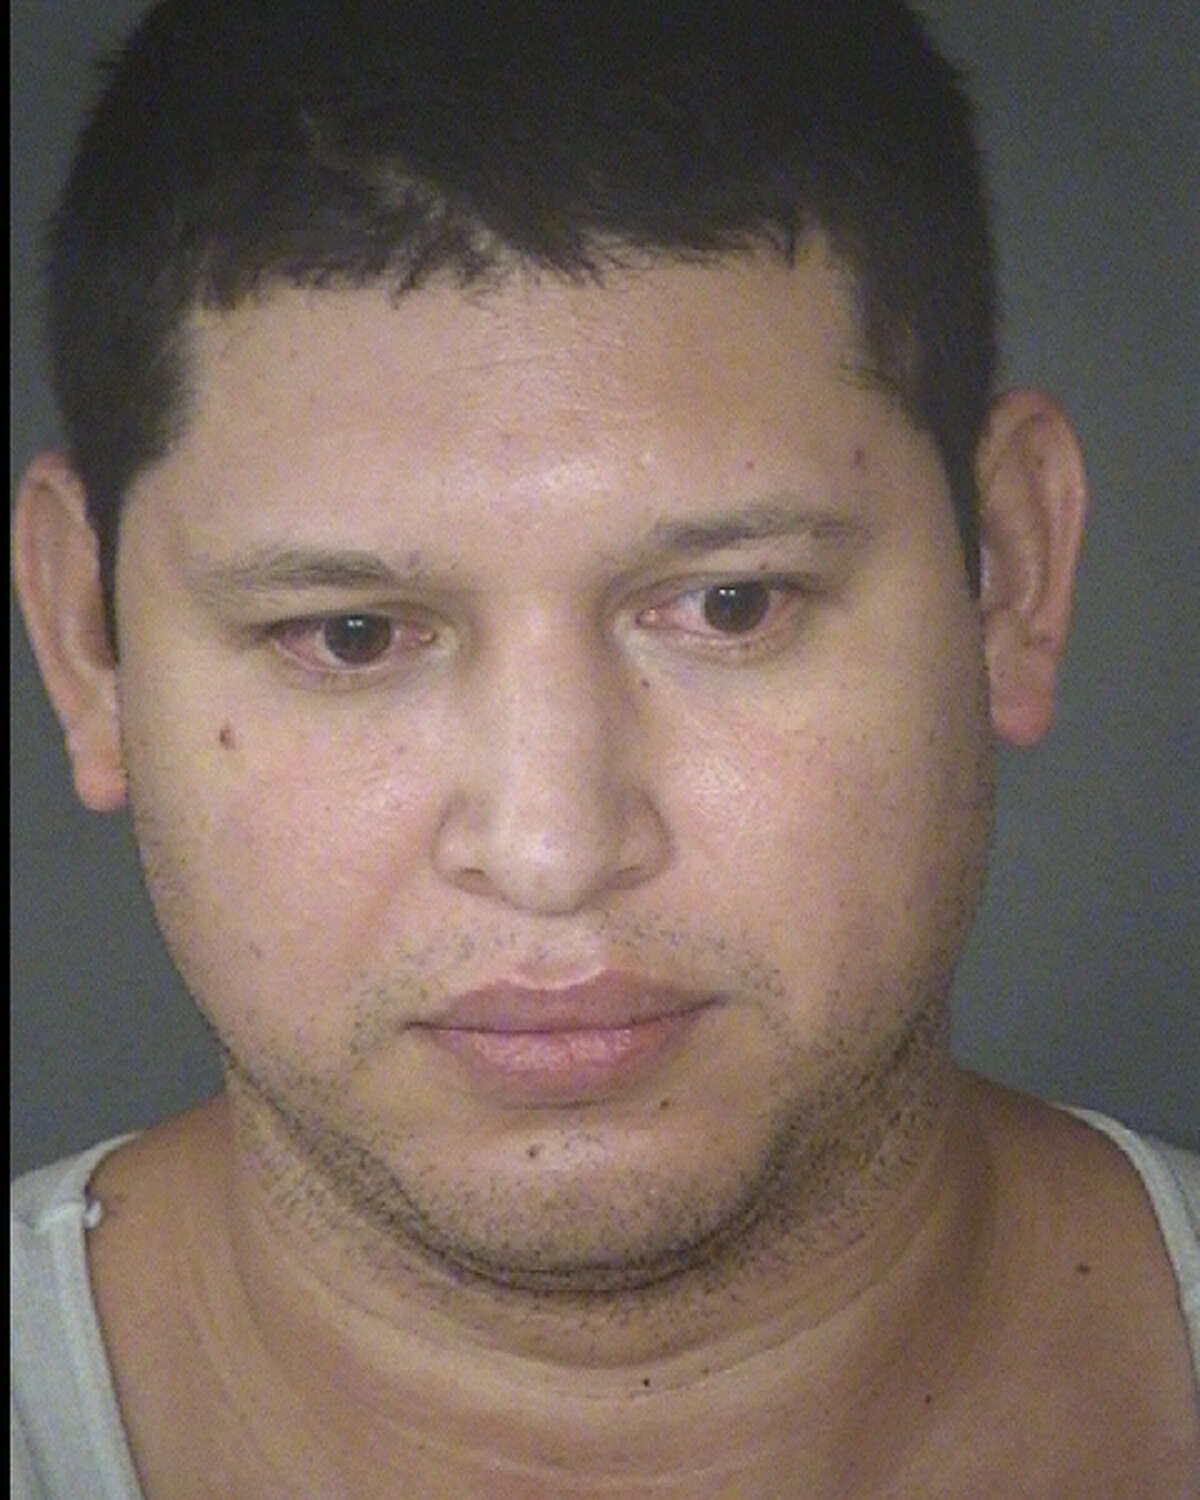 The suspect, 35-year-old Jose Trinidad Gonzalez, now faces charges of aggravated sexual assault of a child and possession of child pornography. He remains in the Bexar County Jail on a $150,000 bond.